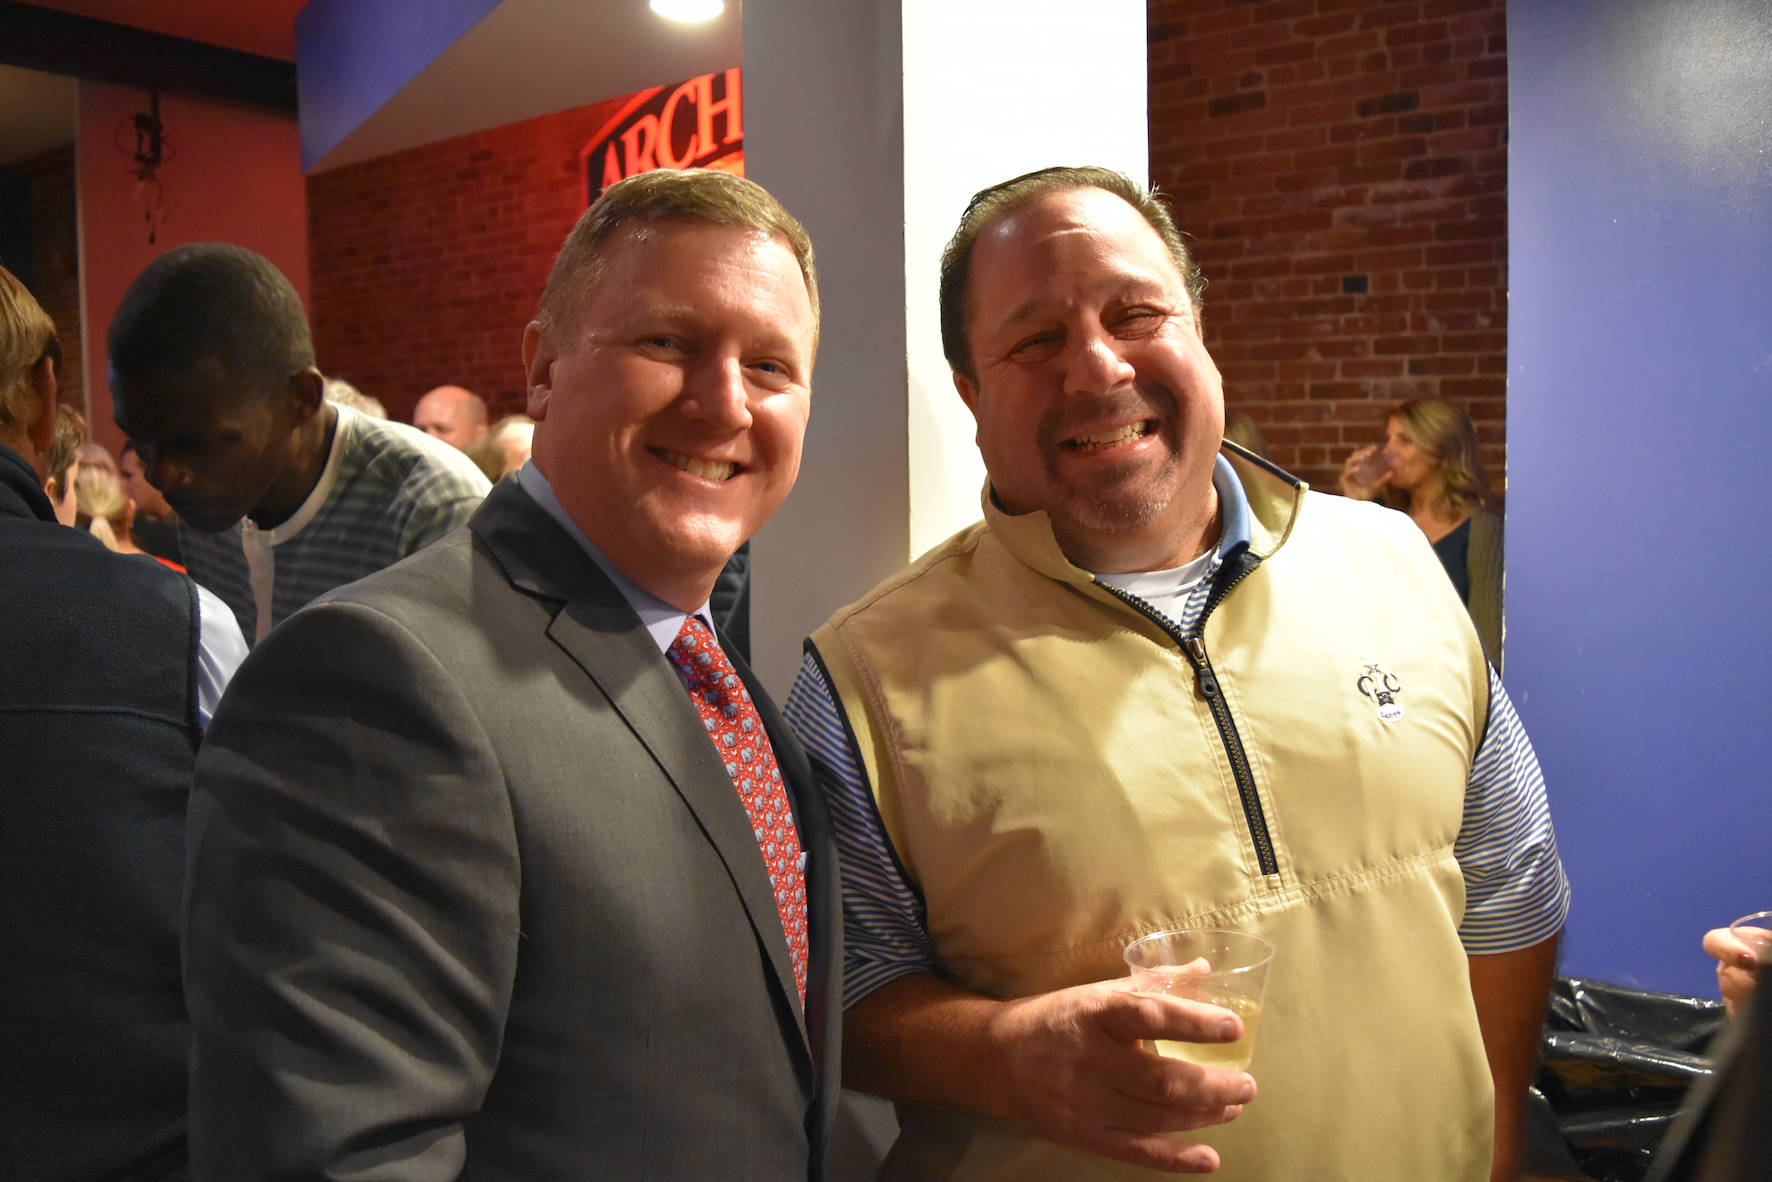 Steve Walko and Thomas Waurishuk celebrated Republican victories at the Teen Center. Nov 5, 2019 Photo: Heather Brown